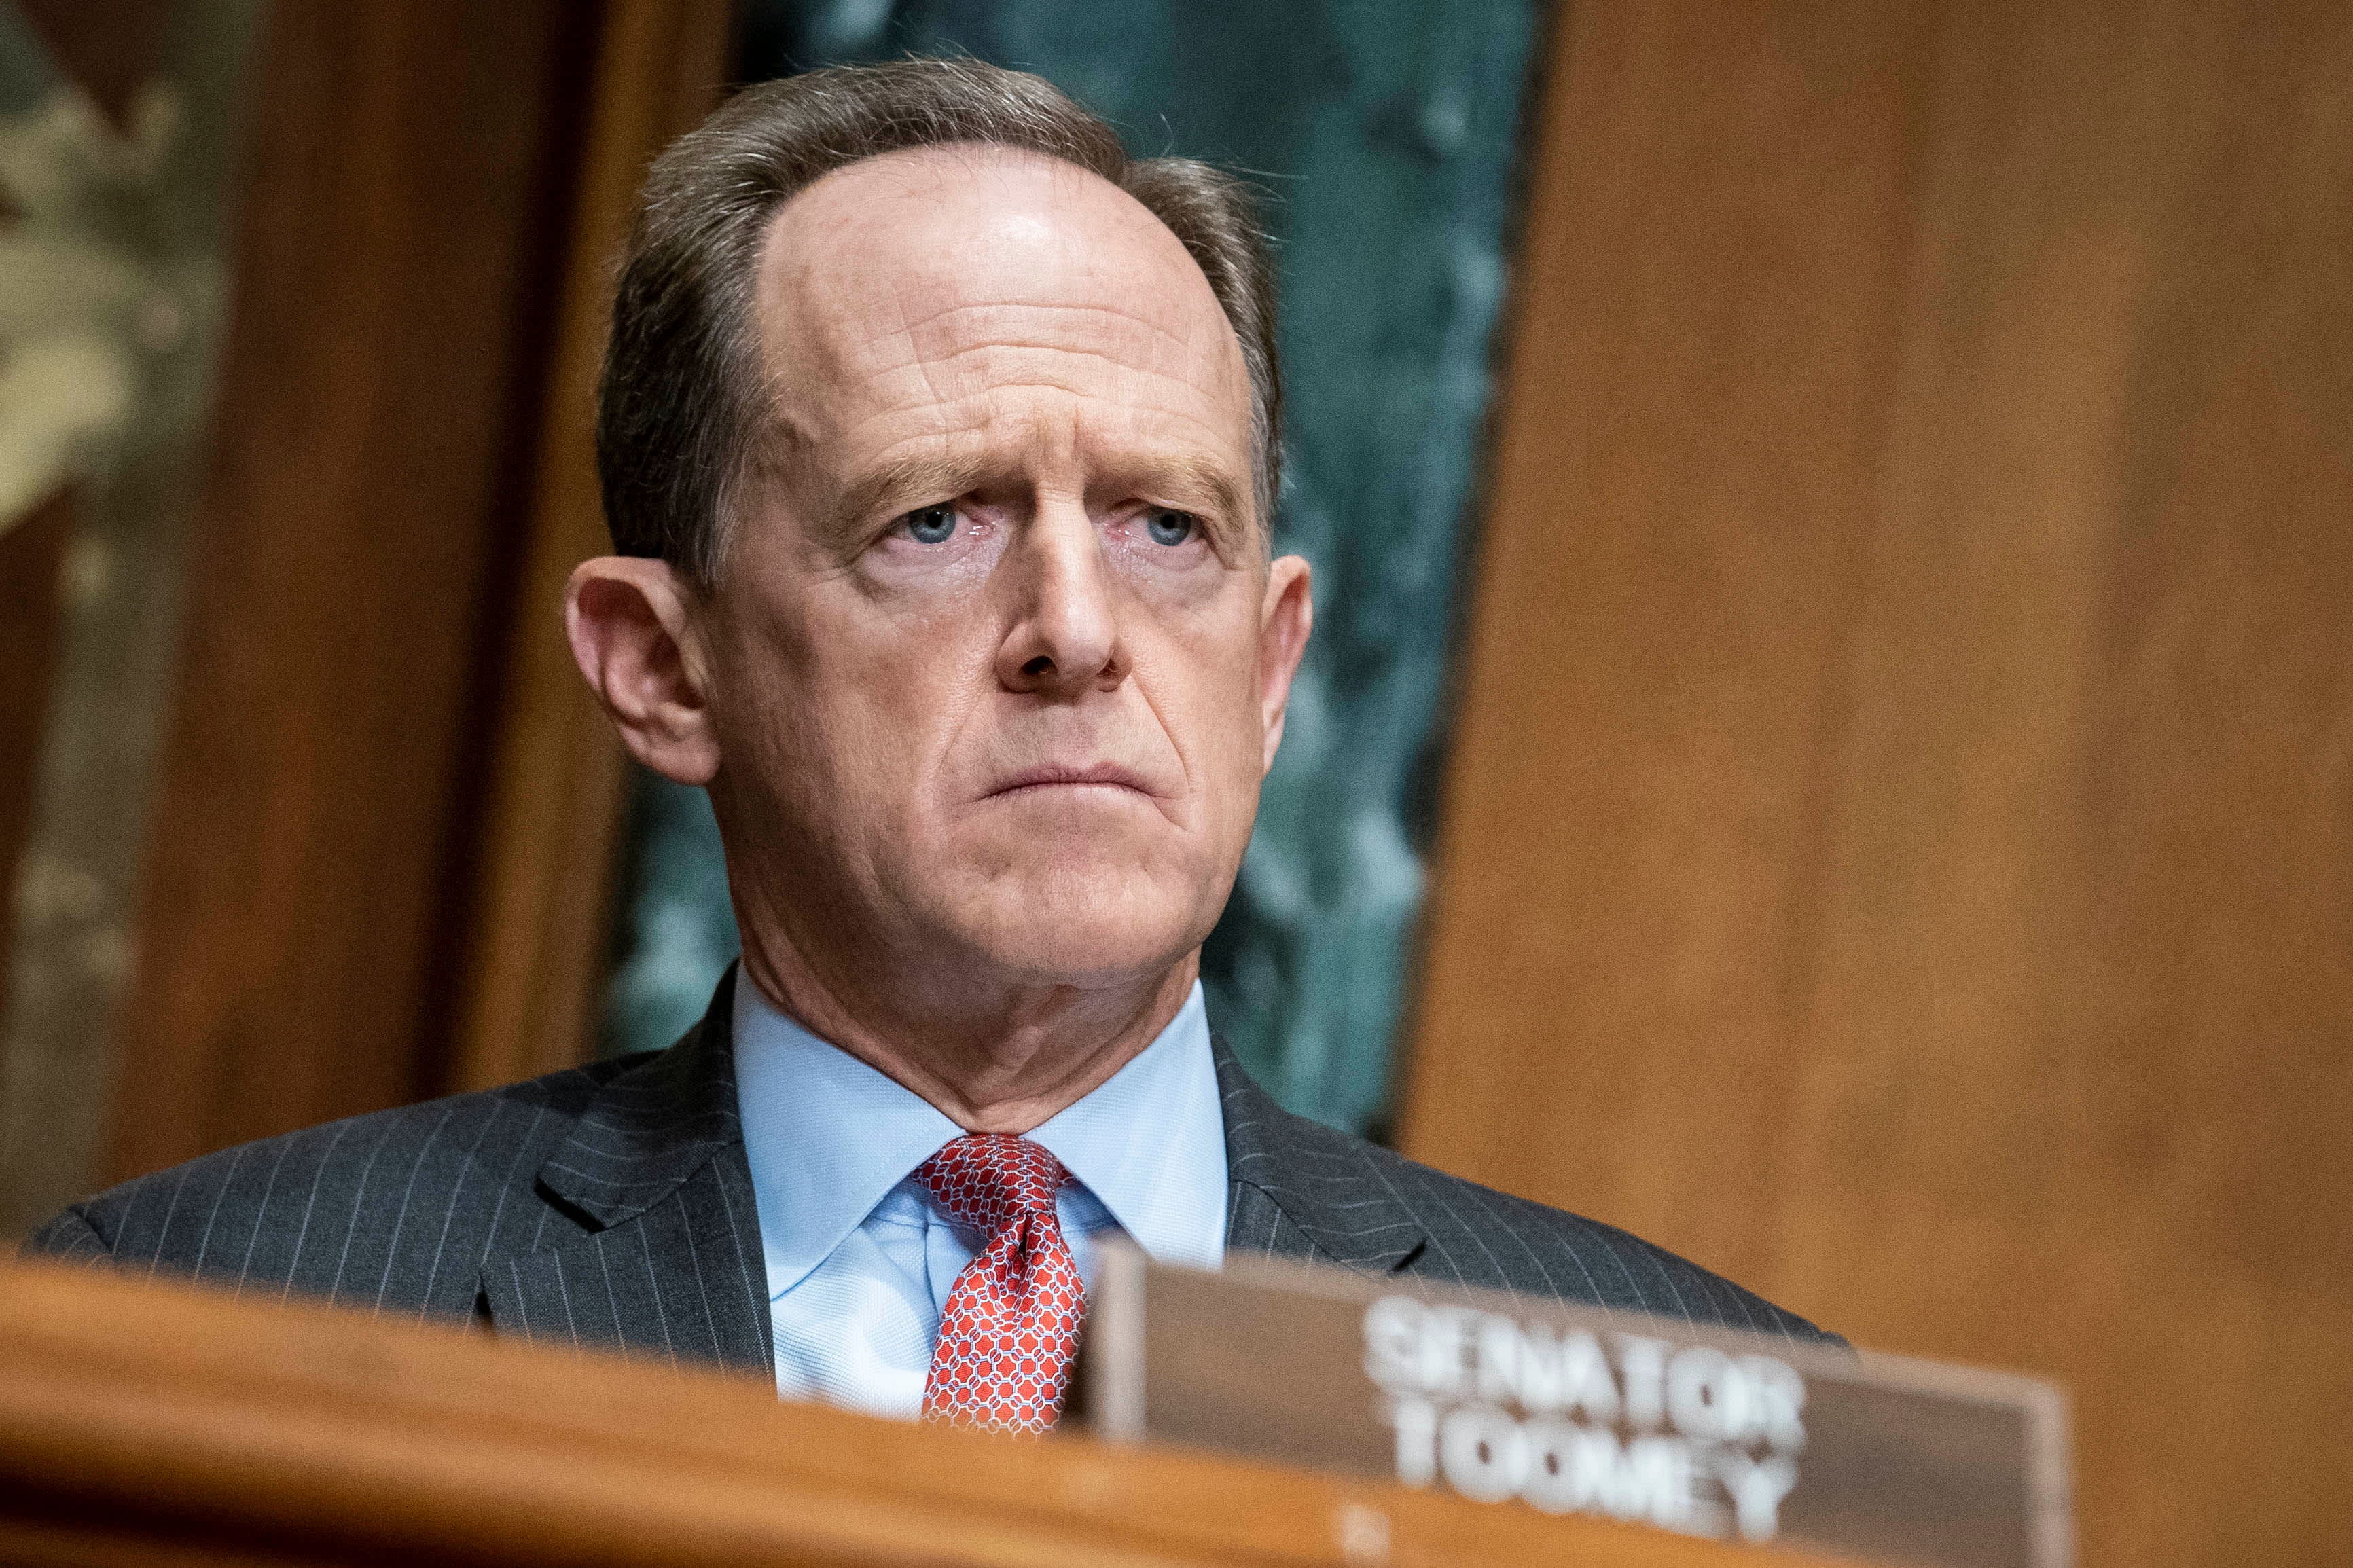 Sen. Toomey accuses the Fed of overstepping on climate change and other social issues